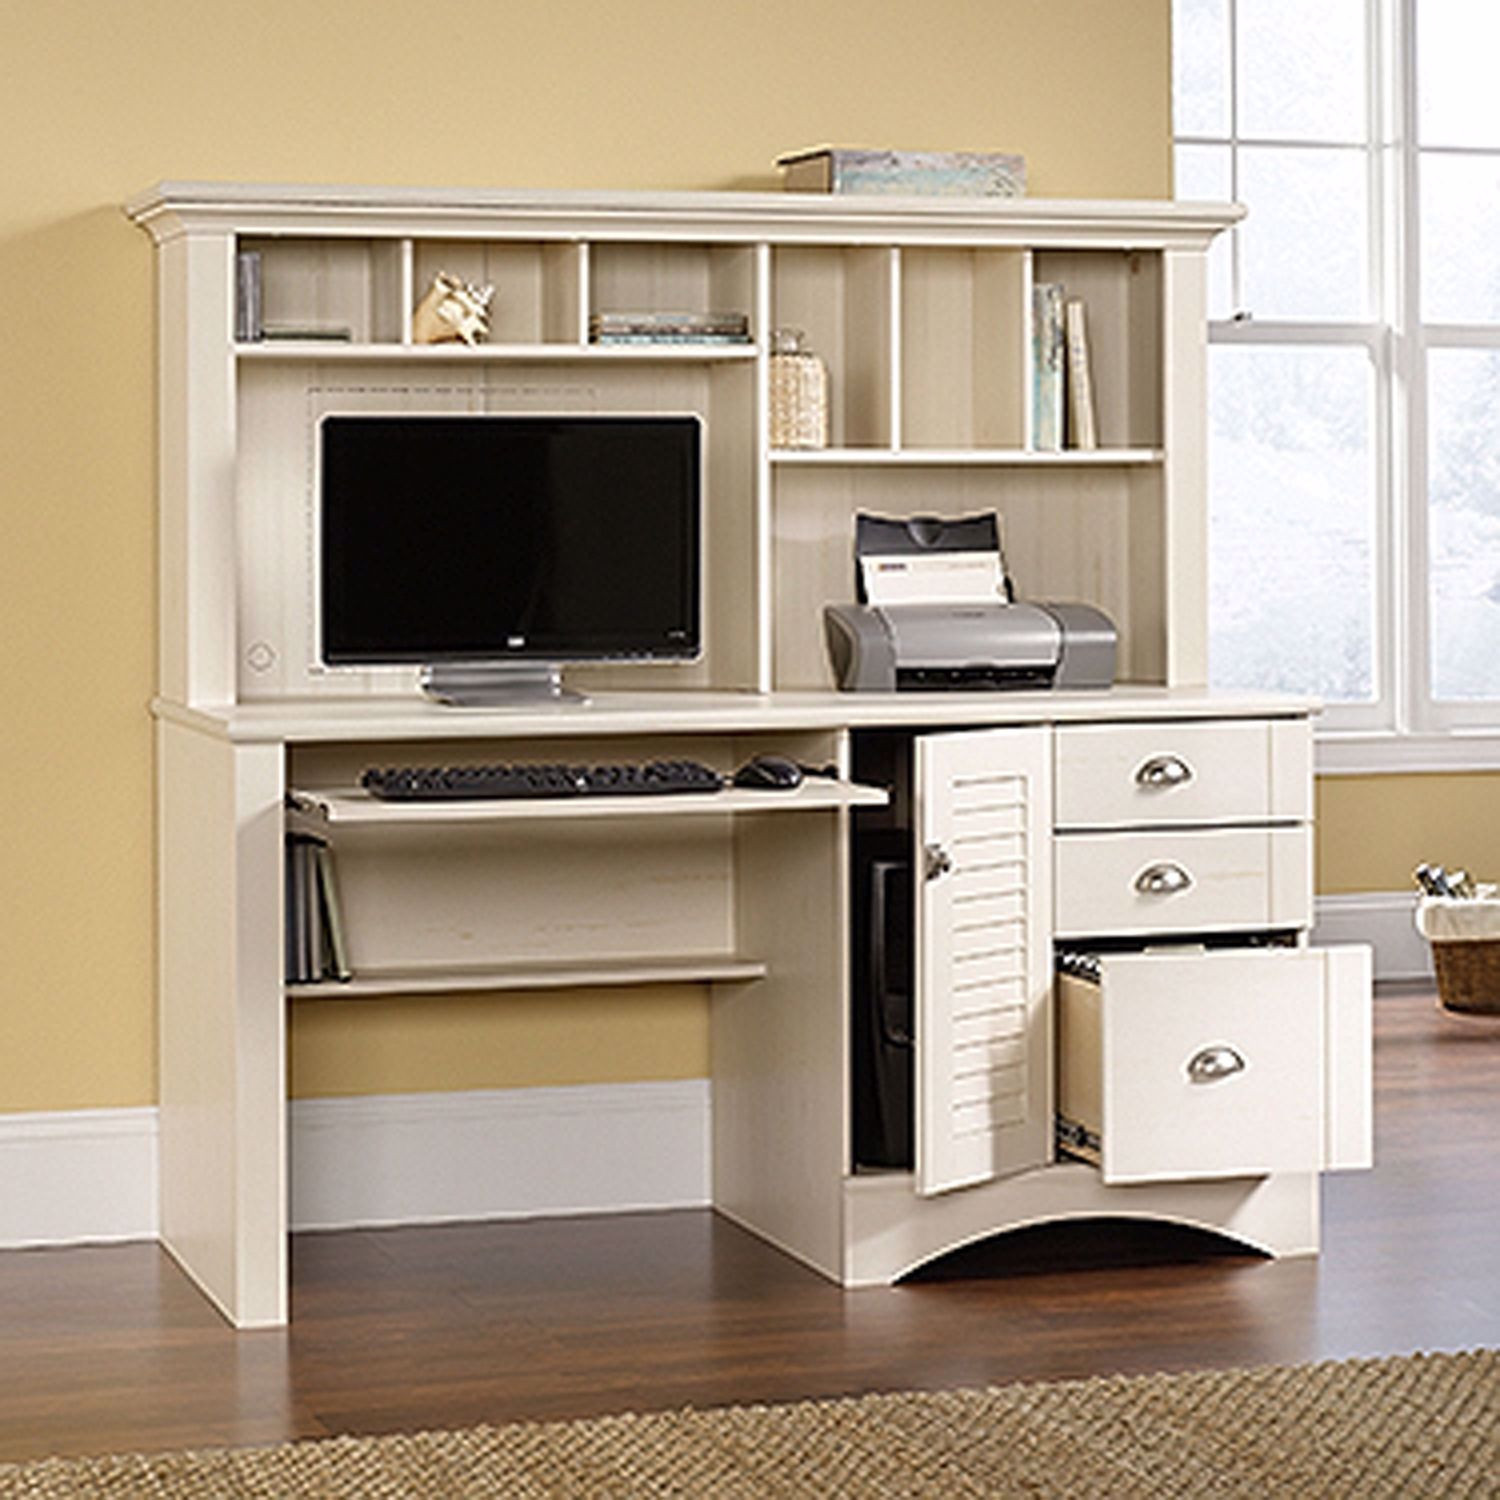 Computer Desk For Small Bedroom
 Harbor View puter Desk W hutch Antiqued White